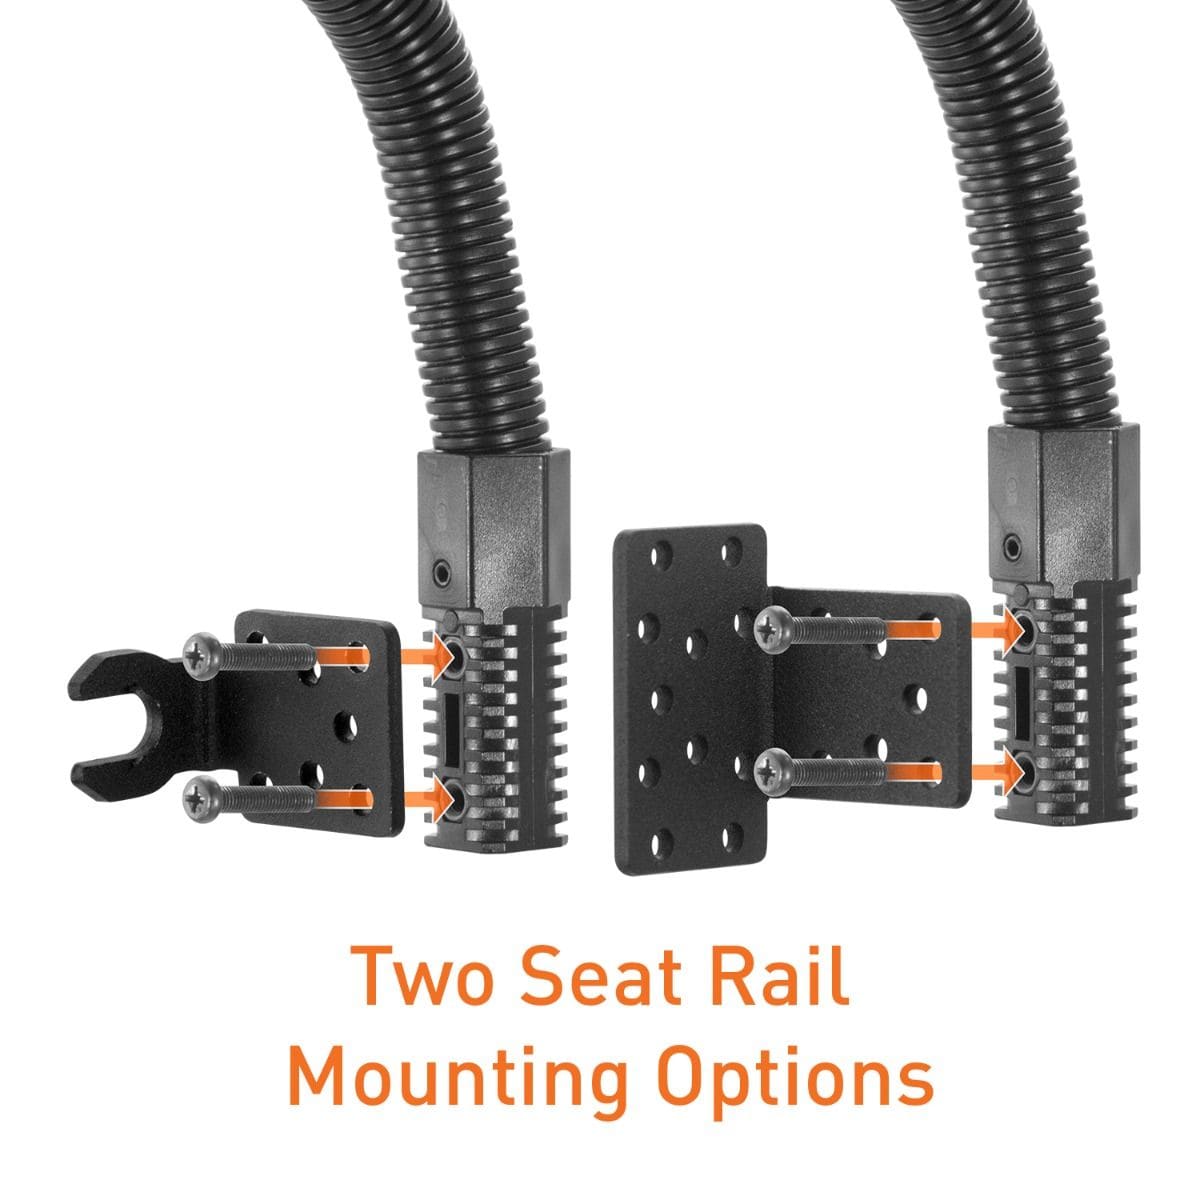 iBOLT™ IncrediBOLT™ Flexpro Heavy Duty Seat Rail Mount w/ 4.25 inch arm & AMPS Plate Adapter